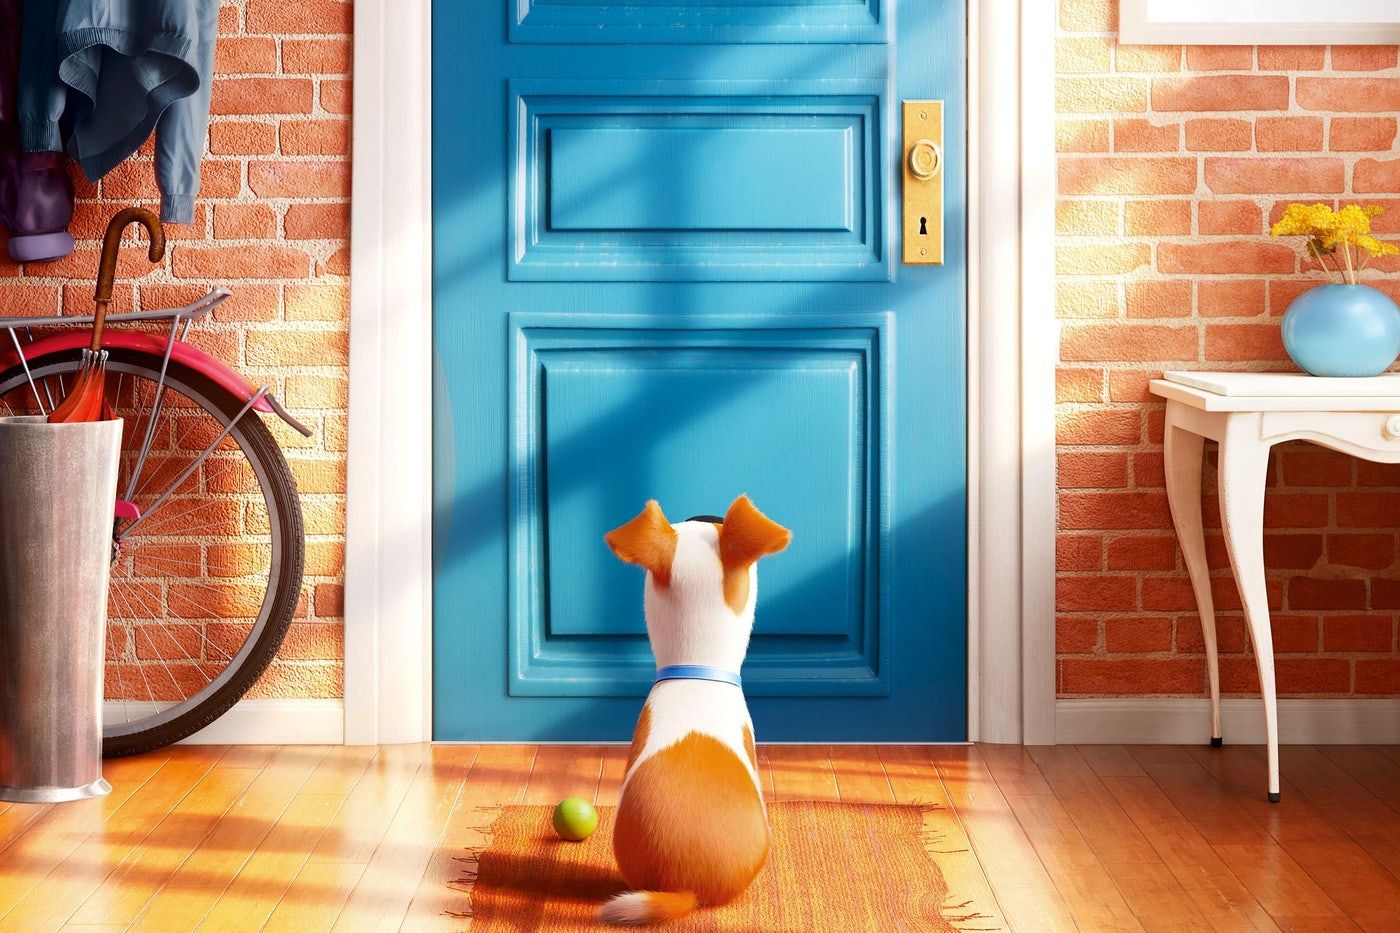 The Secret Life of Pets': Homeward Bound, But Lacking Charm. The New Republic